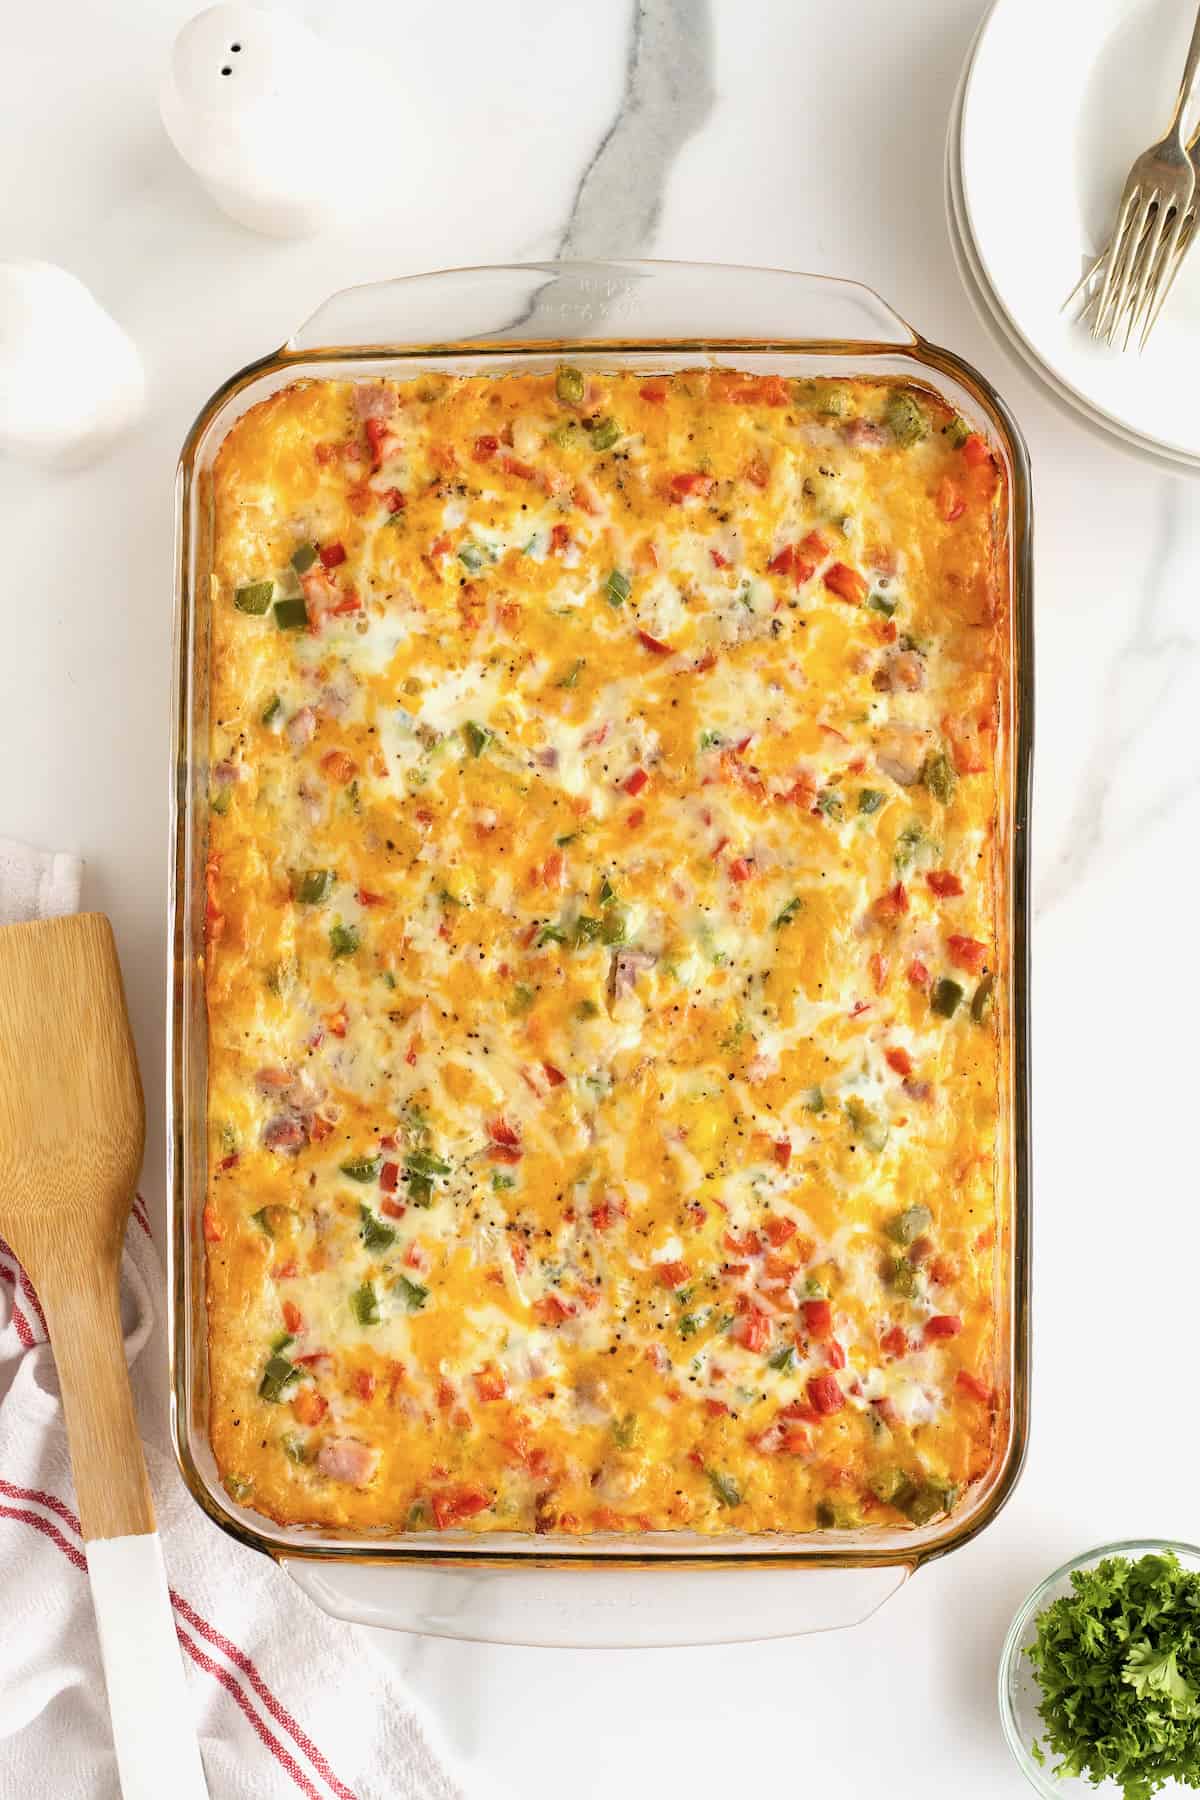 Cooked breakfast casserole in a glass casserole dish with a wooden spatula next to it.